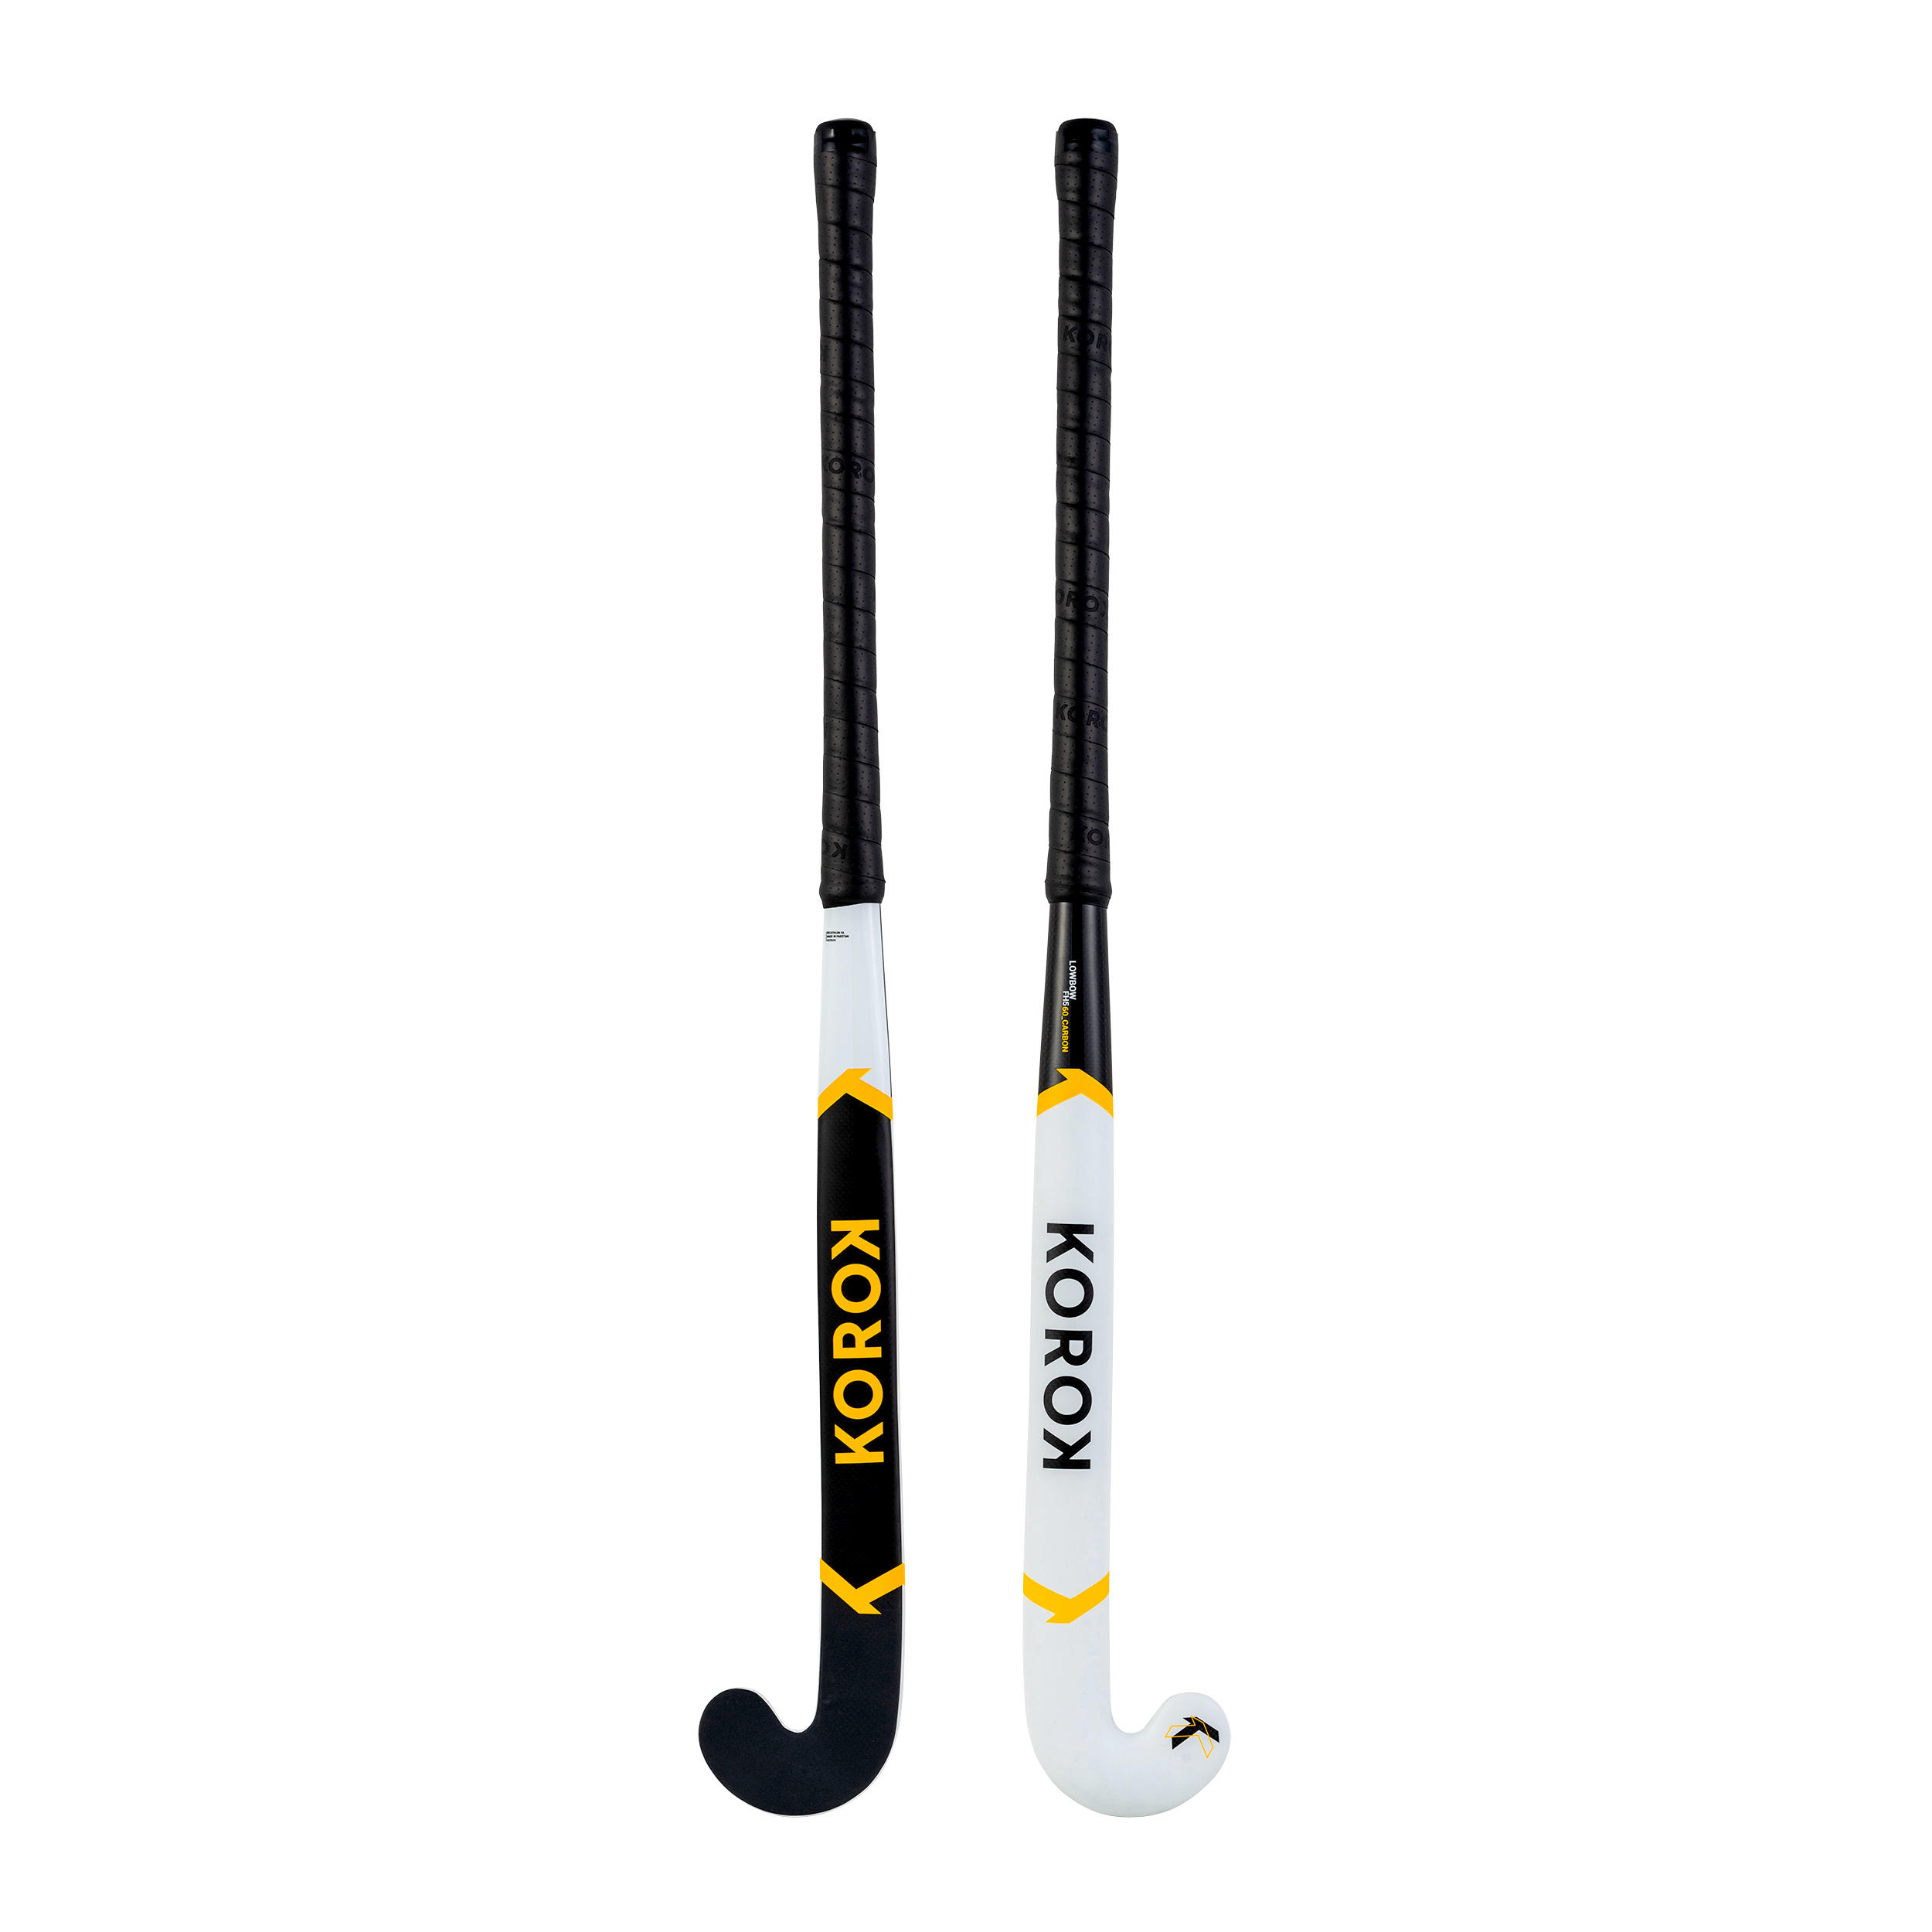 Adult Intermediate 60% Carbon Low Bow Field Hockey Stick FH560 - White/Yellow 6/12